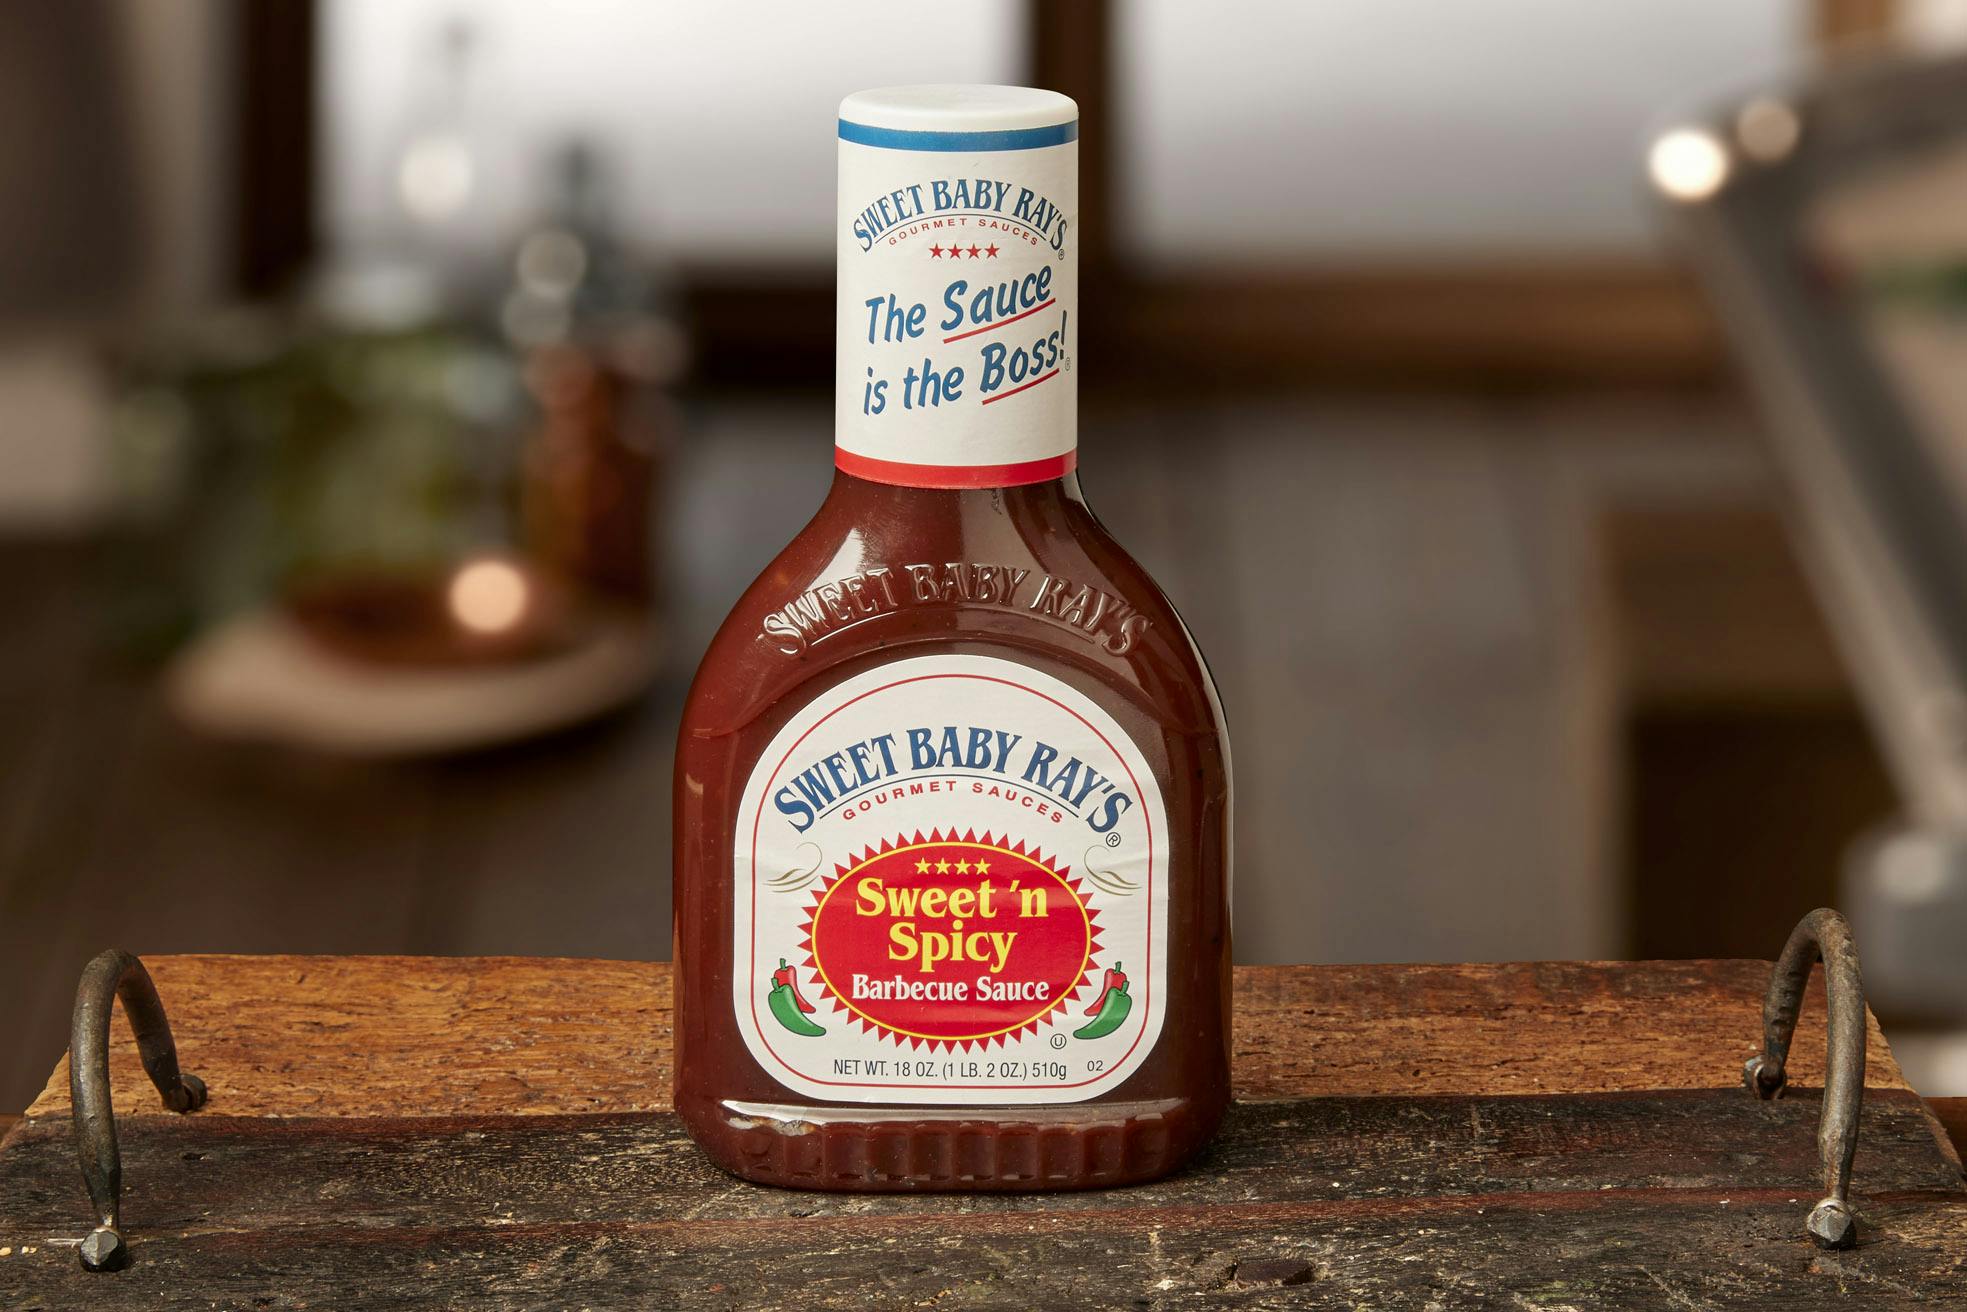 Sweet Baby Ray Sweet and Spicy BBQ Sauce #1